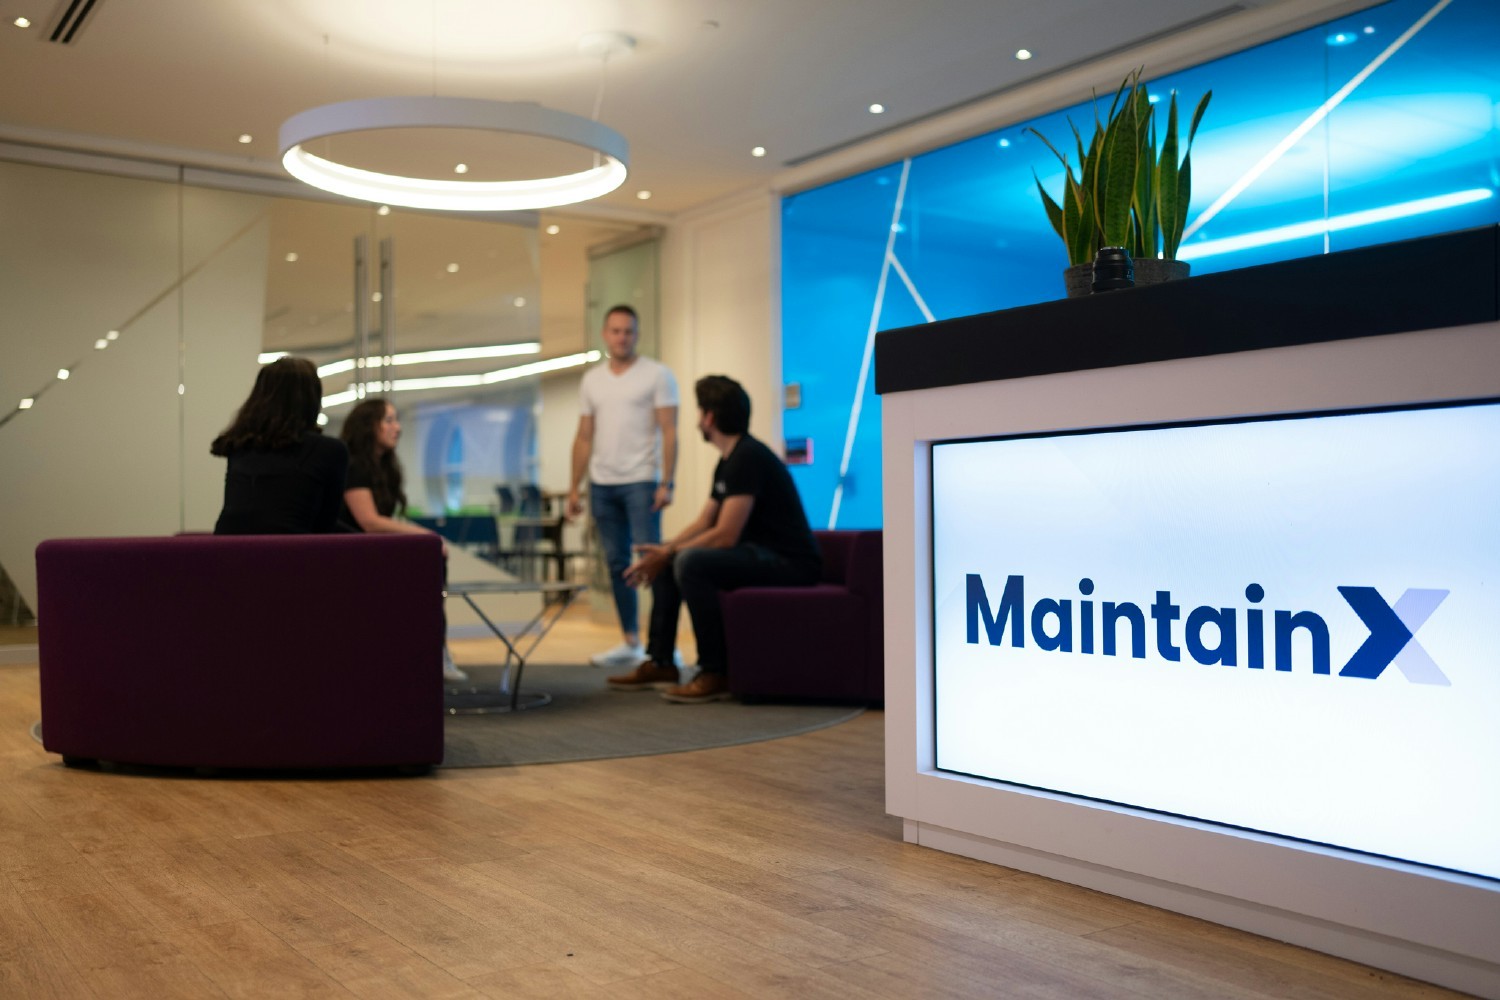 Welcome to MaintainX!